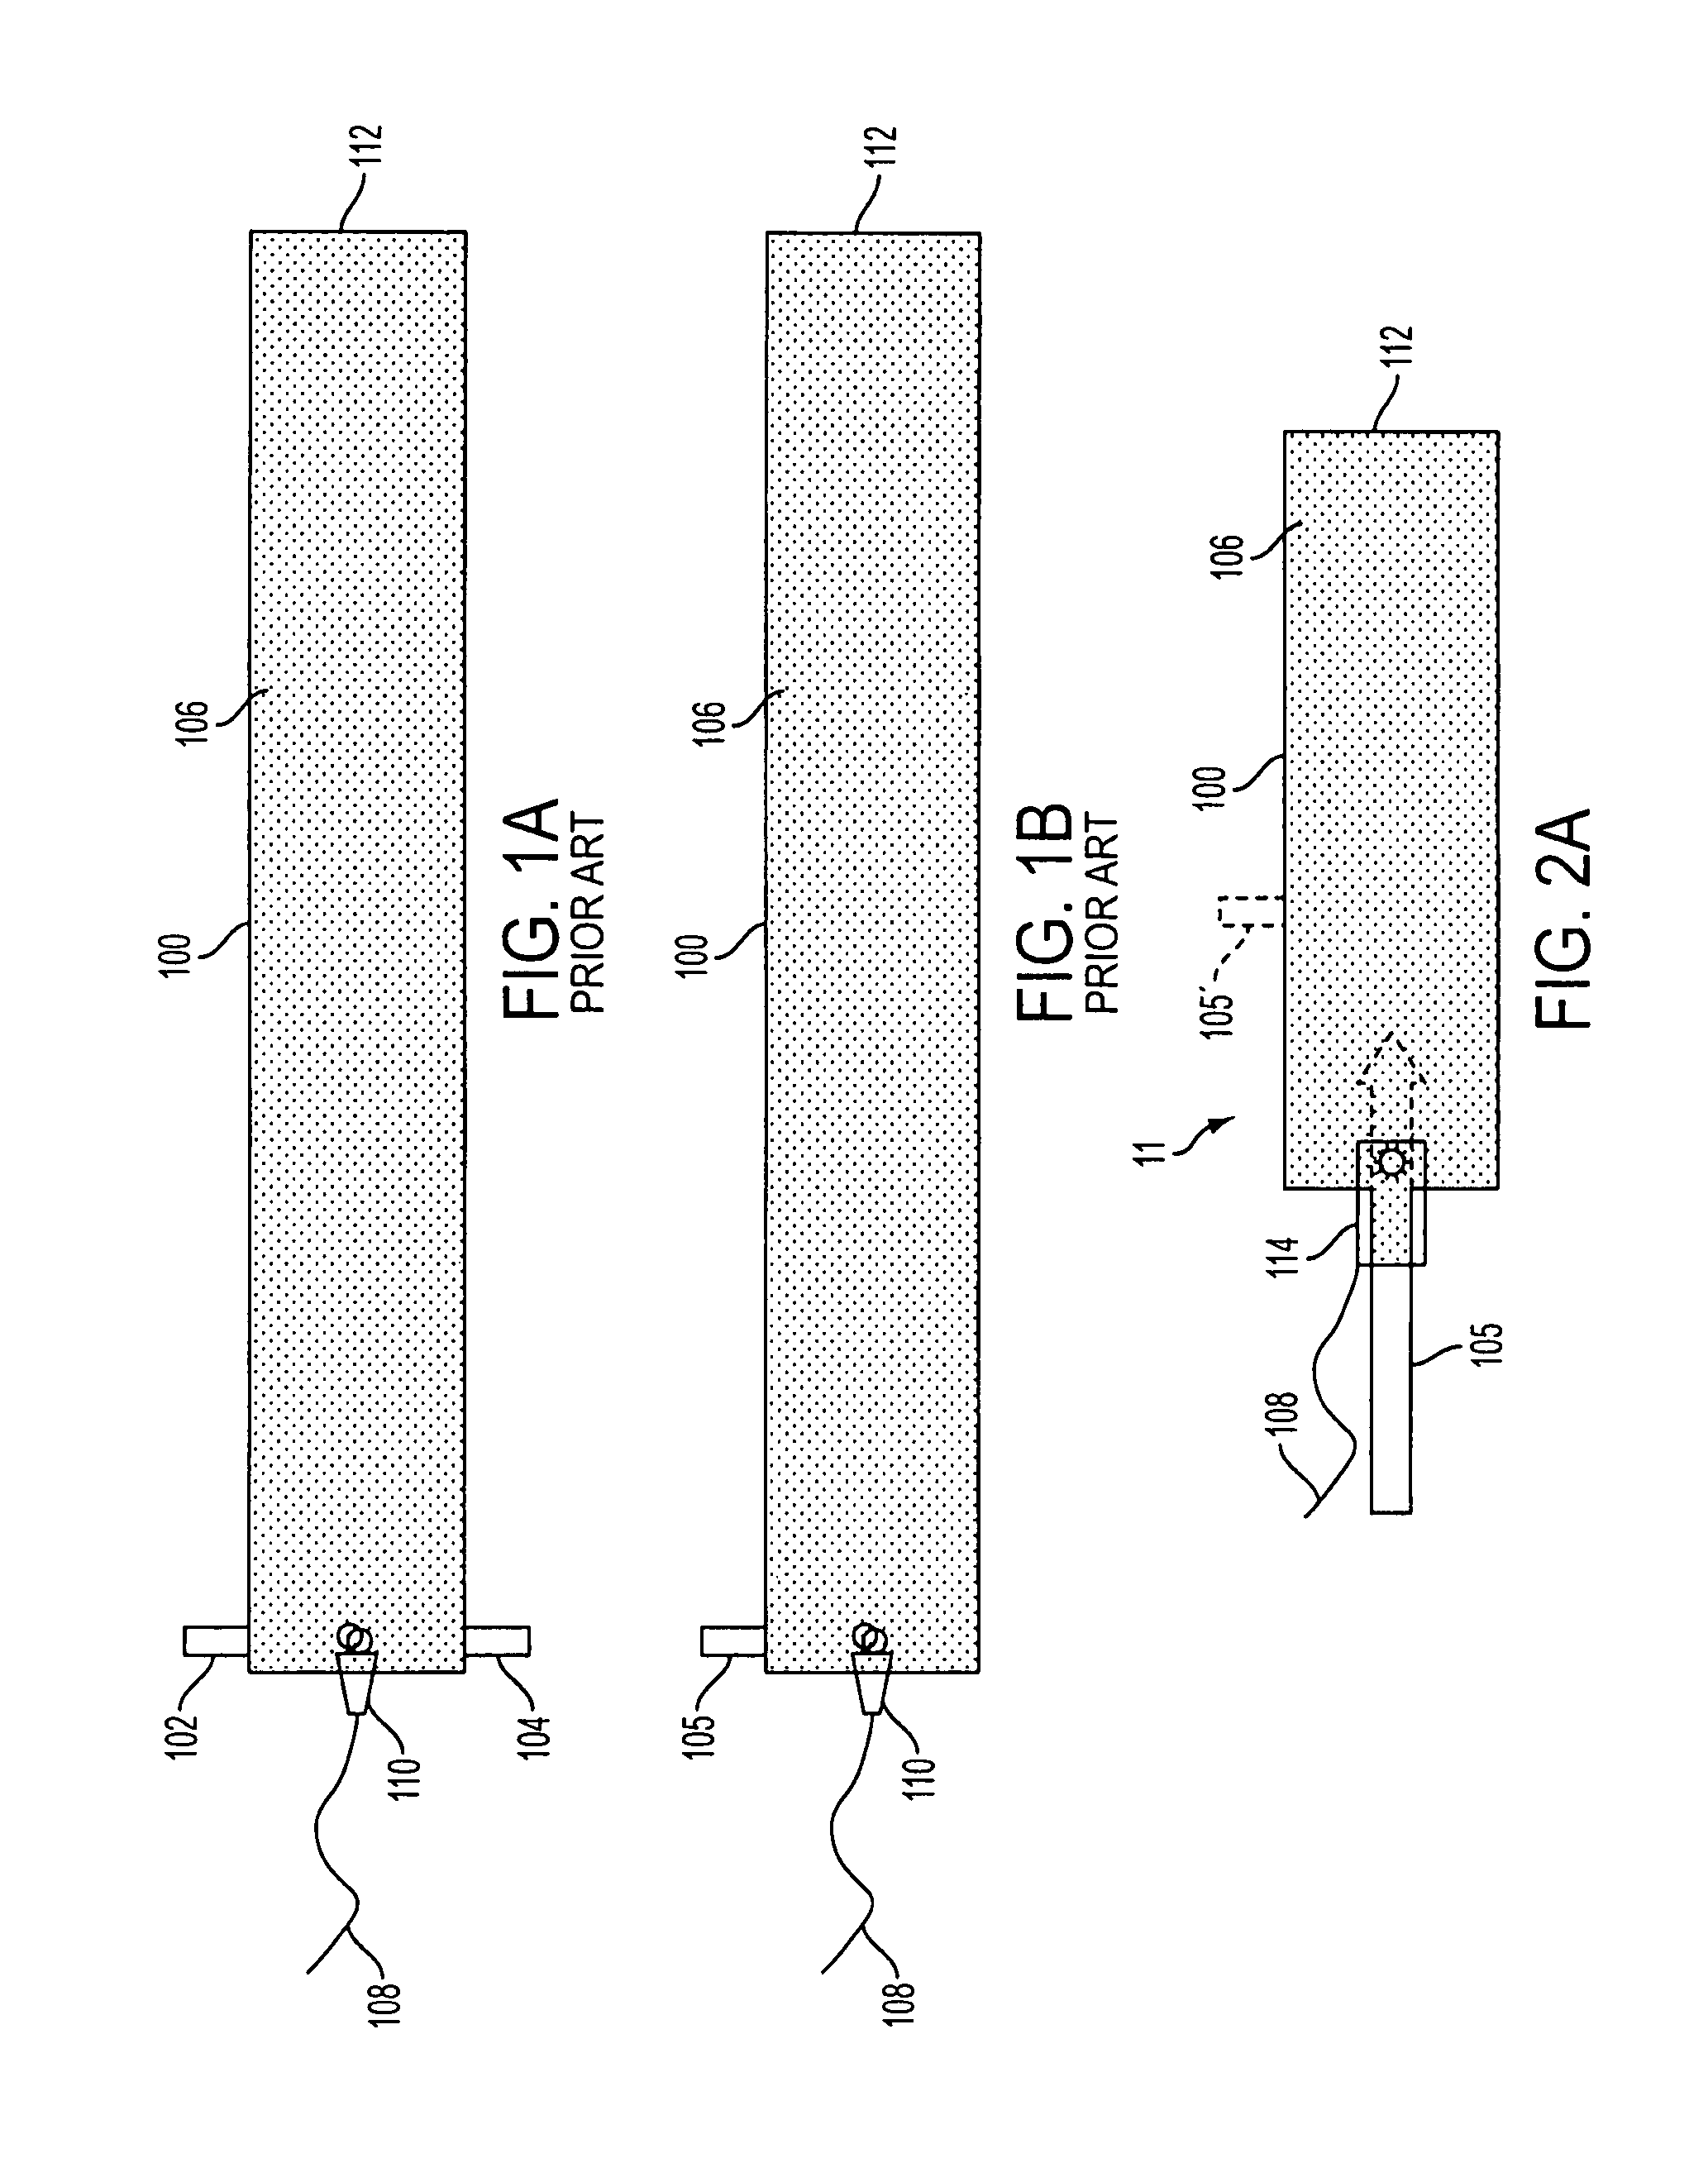 System and method for generating and directing very loud sounds